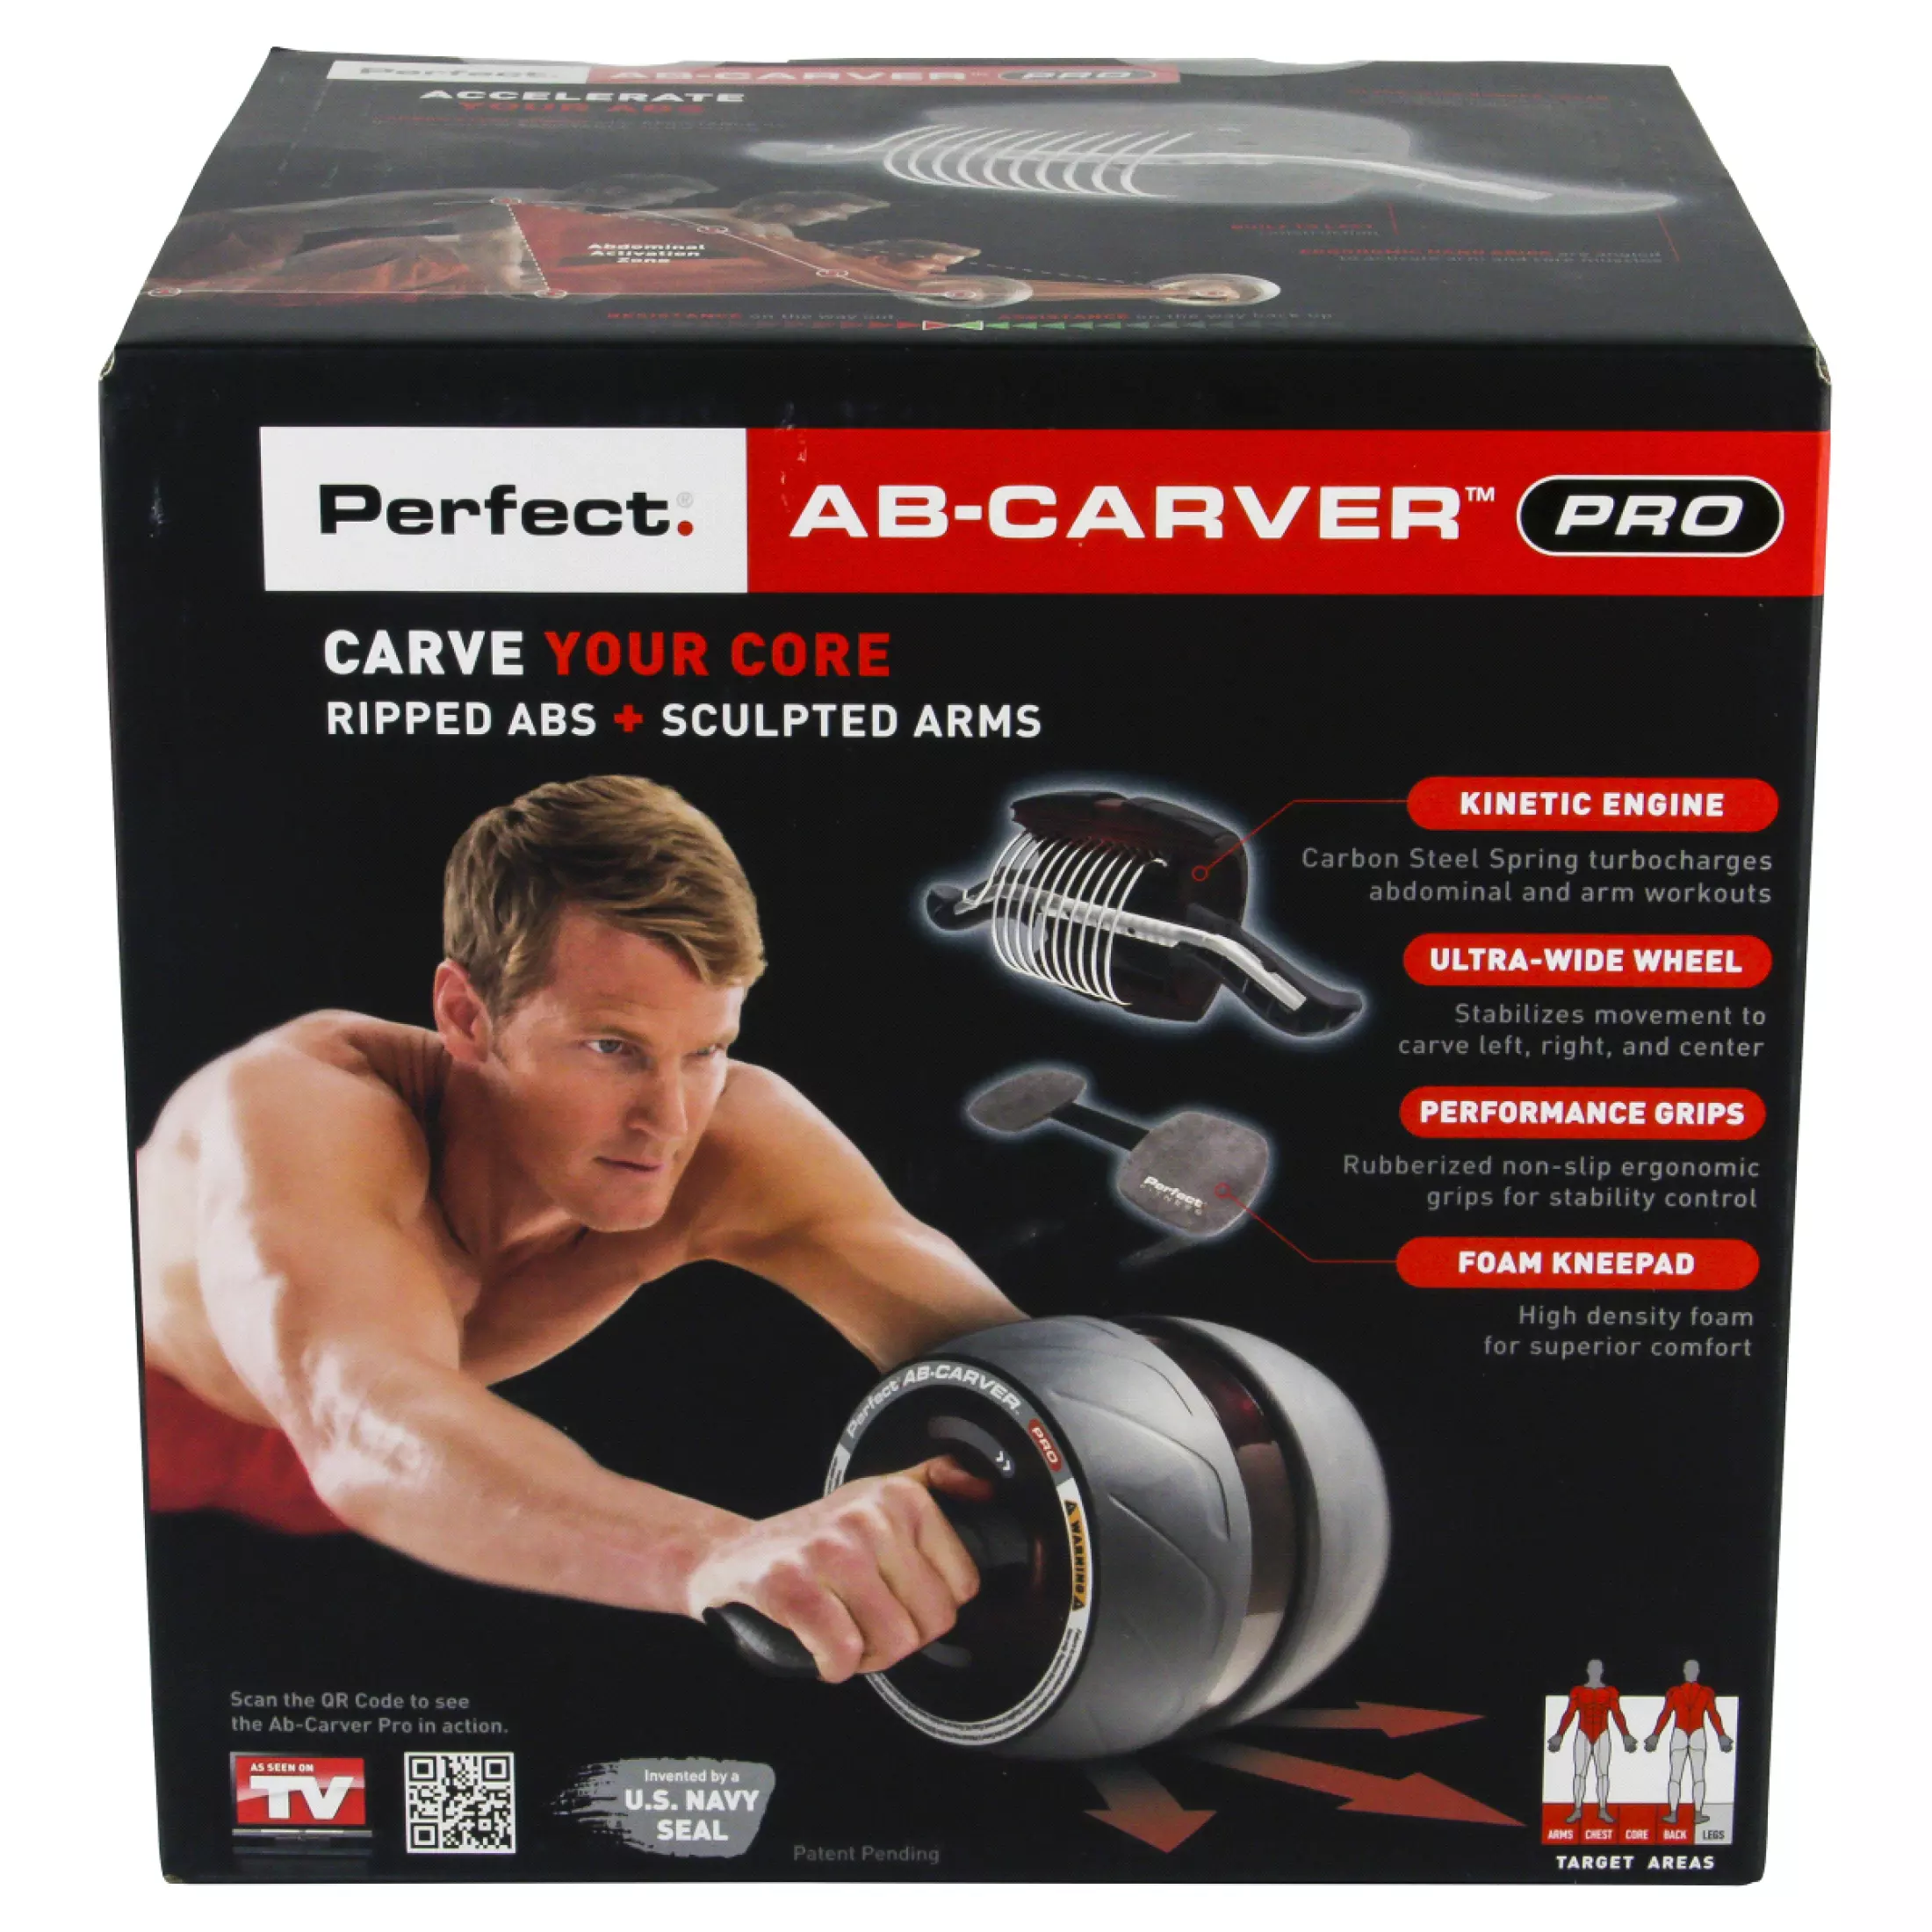 Perfect ab carver prom exercise device Perfect ab carver prom exercise device Fitness and slimming